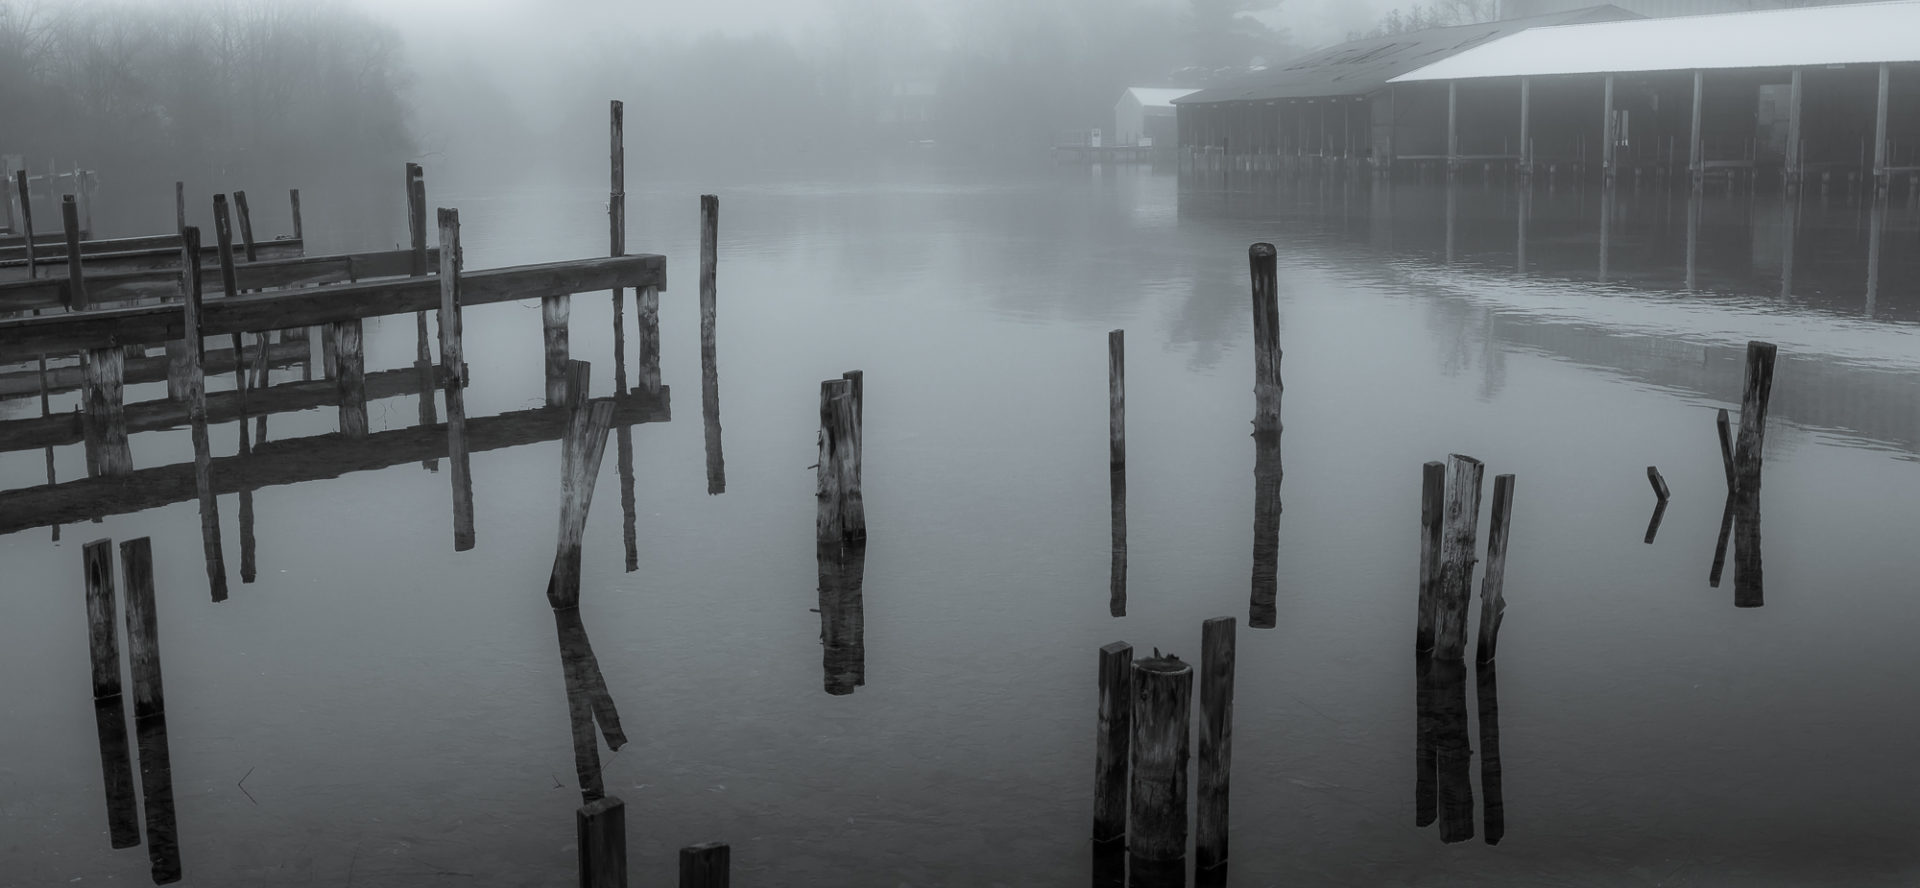 foggy morning looking over dock pilings and boathouse at standard marina on the carp river of Leland Michigan